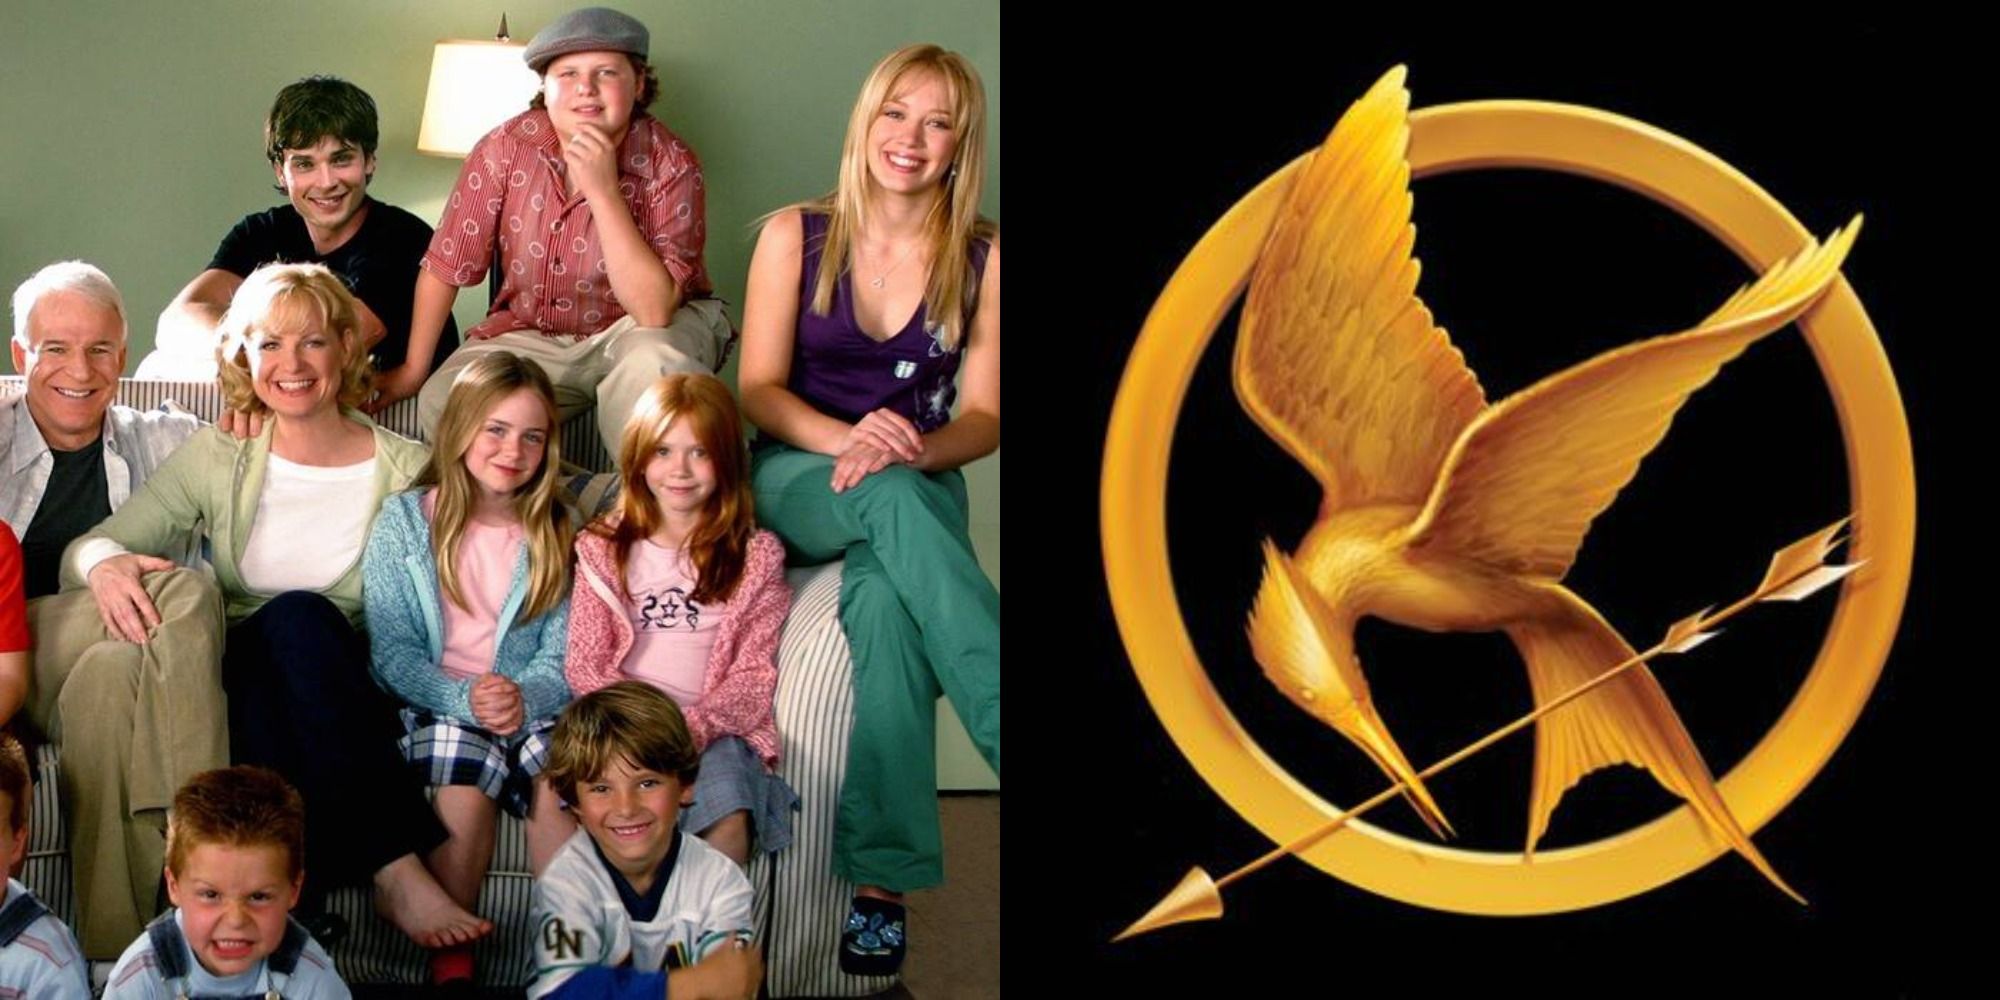 Split image showing the cast of Cheaper by the Dozen and the Hunger Games logo